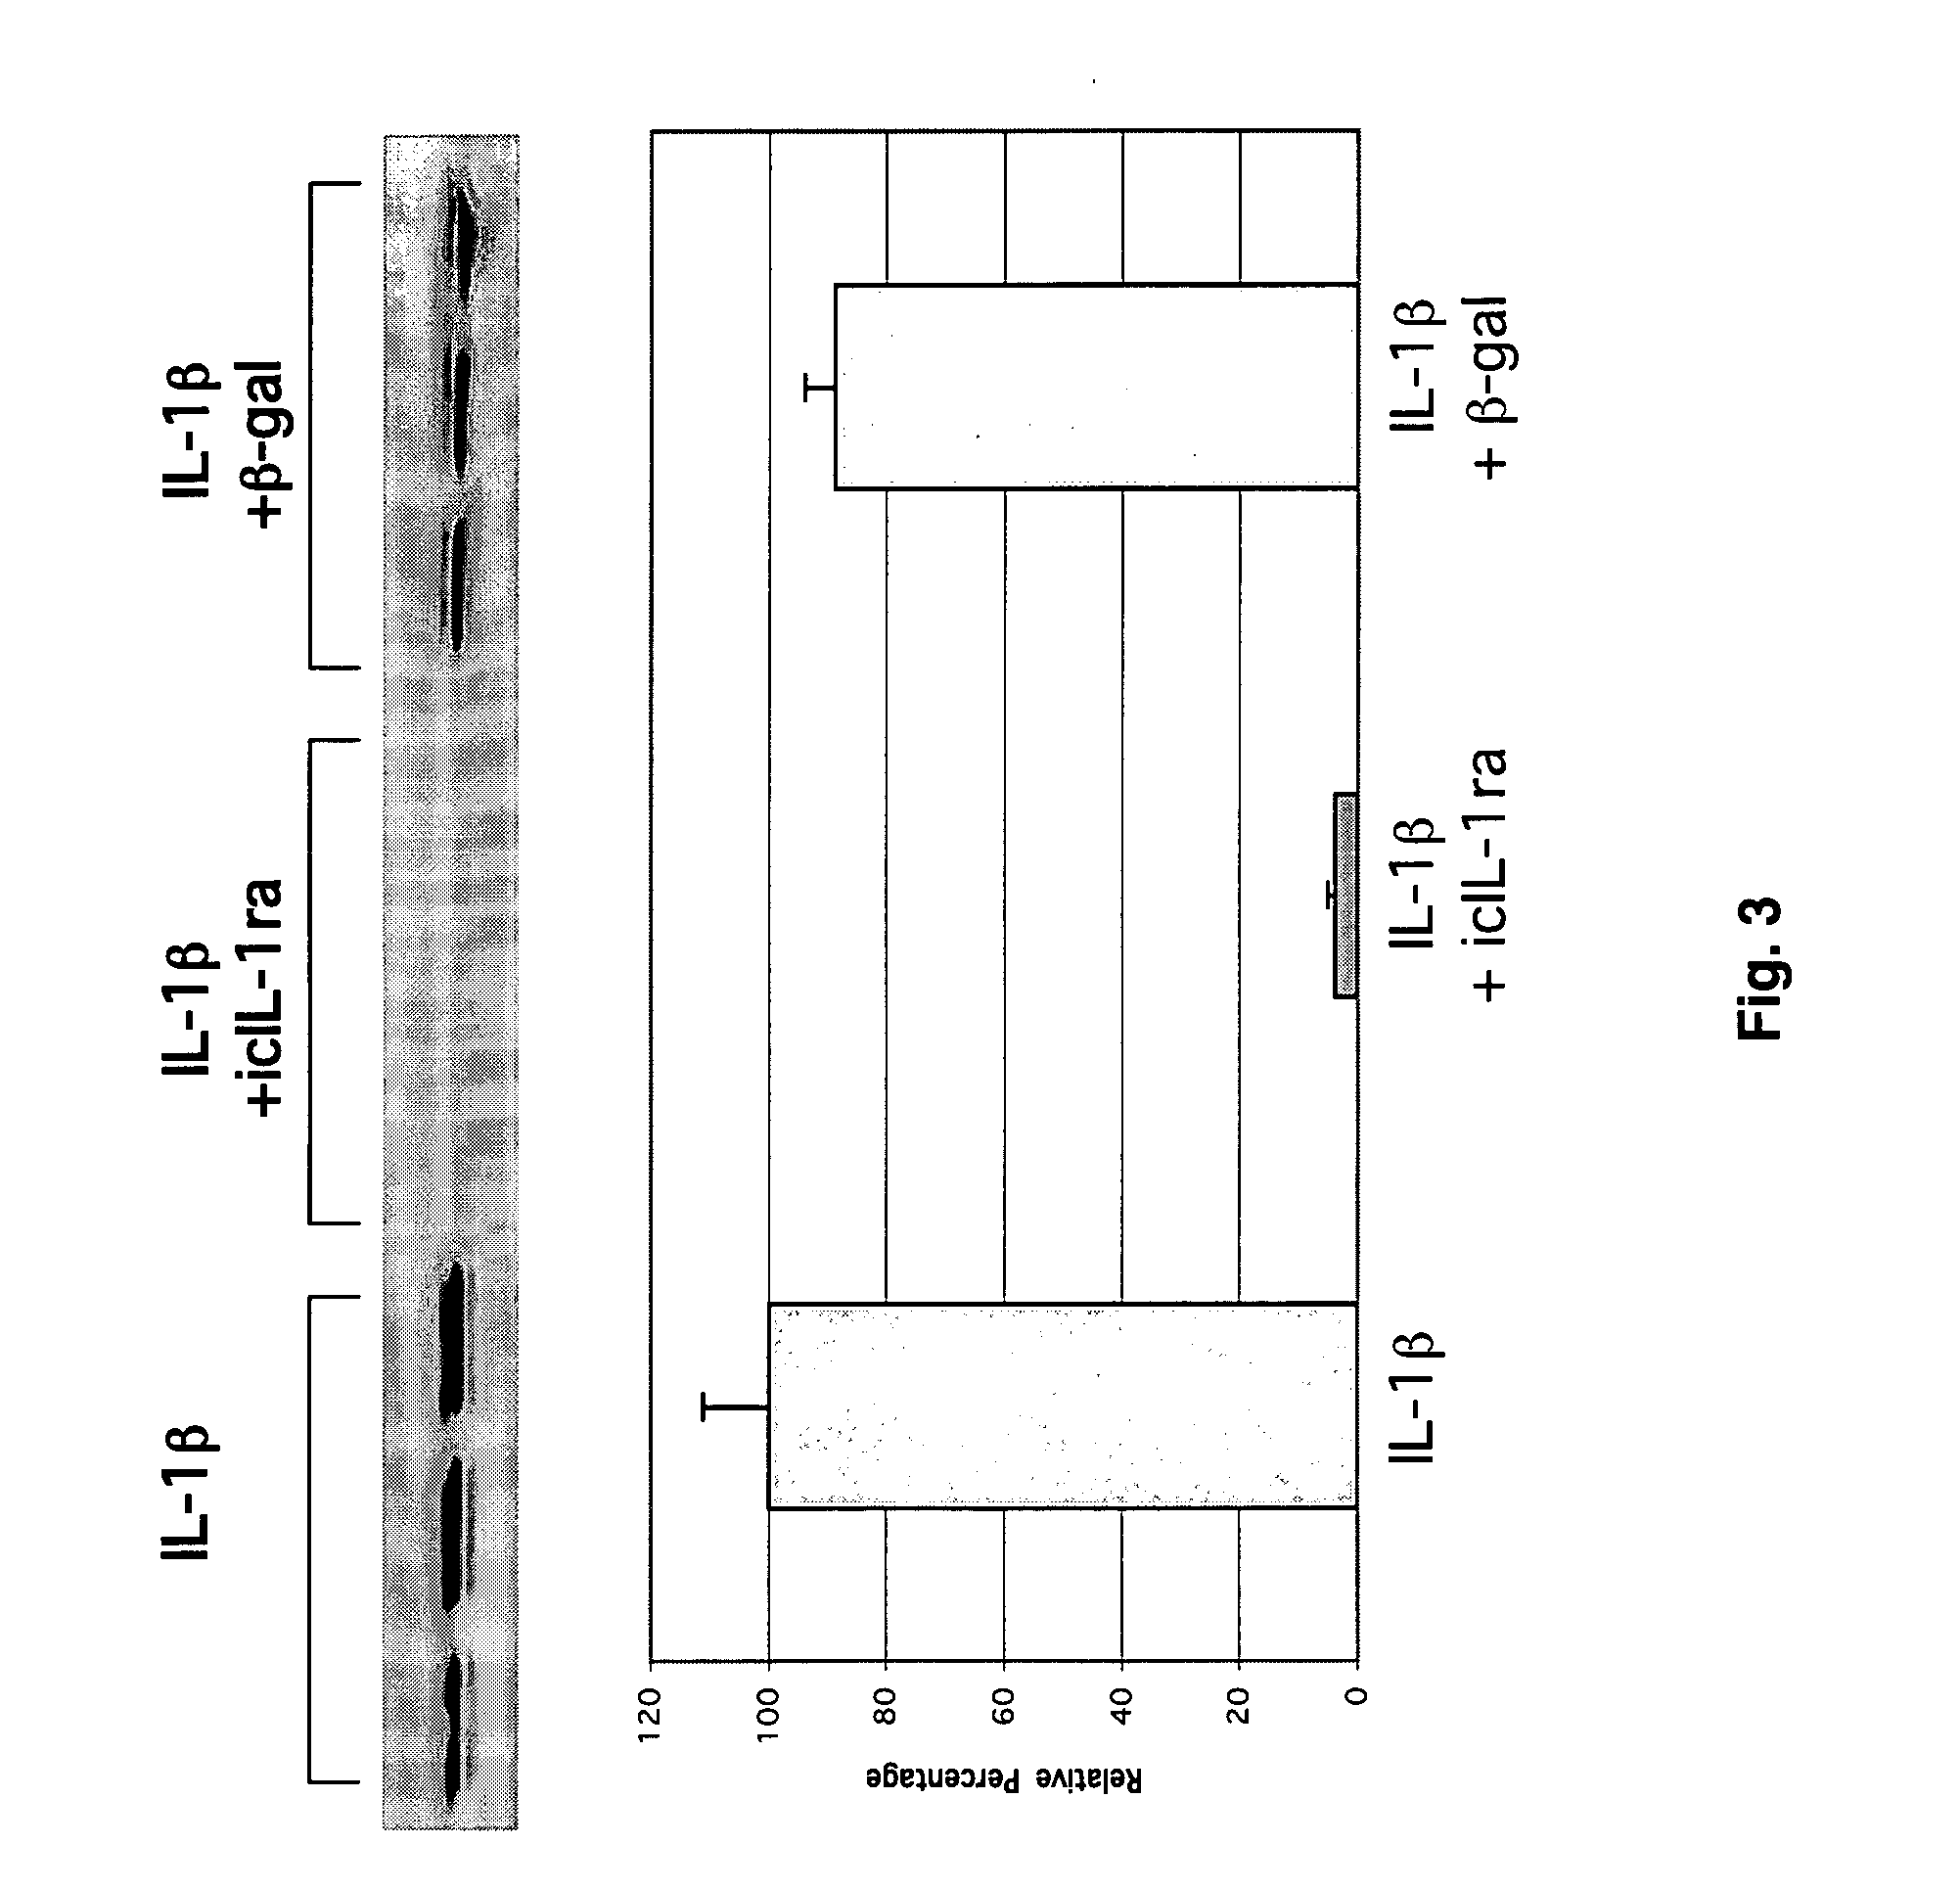 Intracellular interleukin-1 receptor antagonist and uses thereof